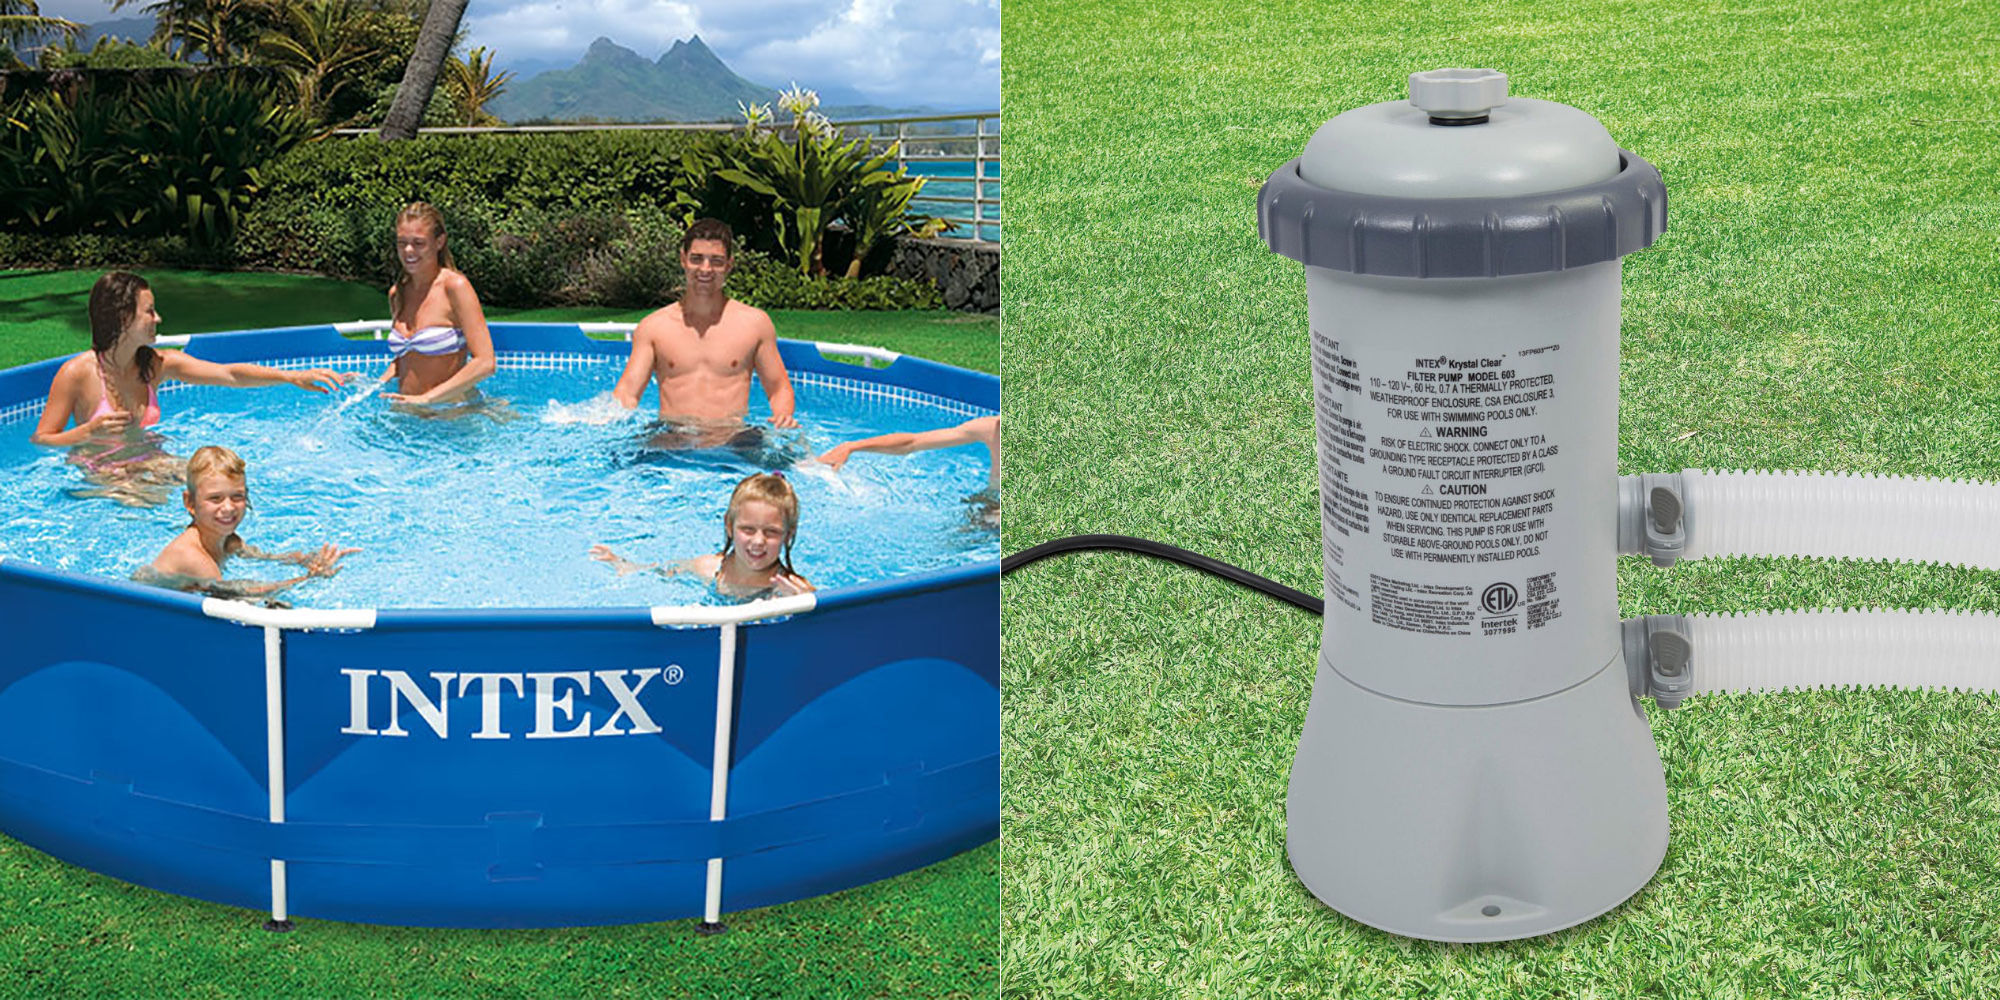 Intex 12′ x 30″ Metal Frame Above Ground Swimming Pool with Filter—$99.99!! (Reg $199.99)